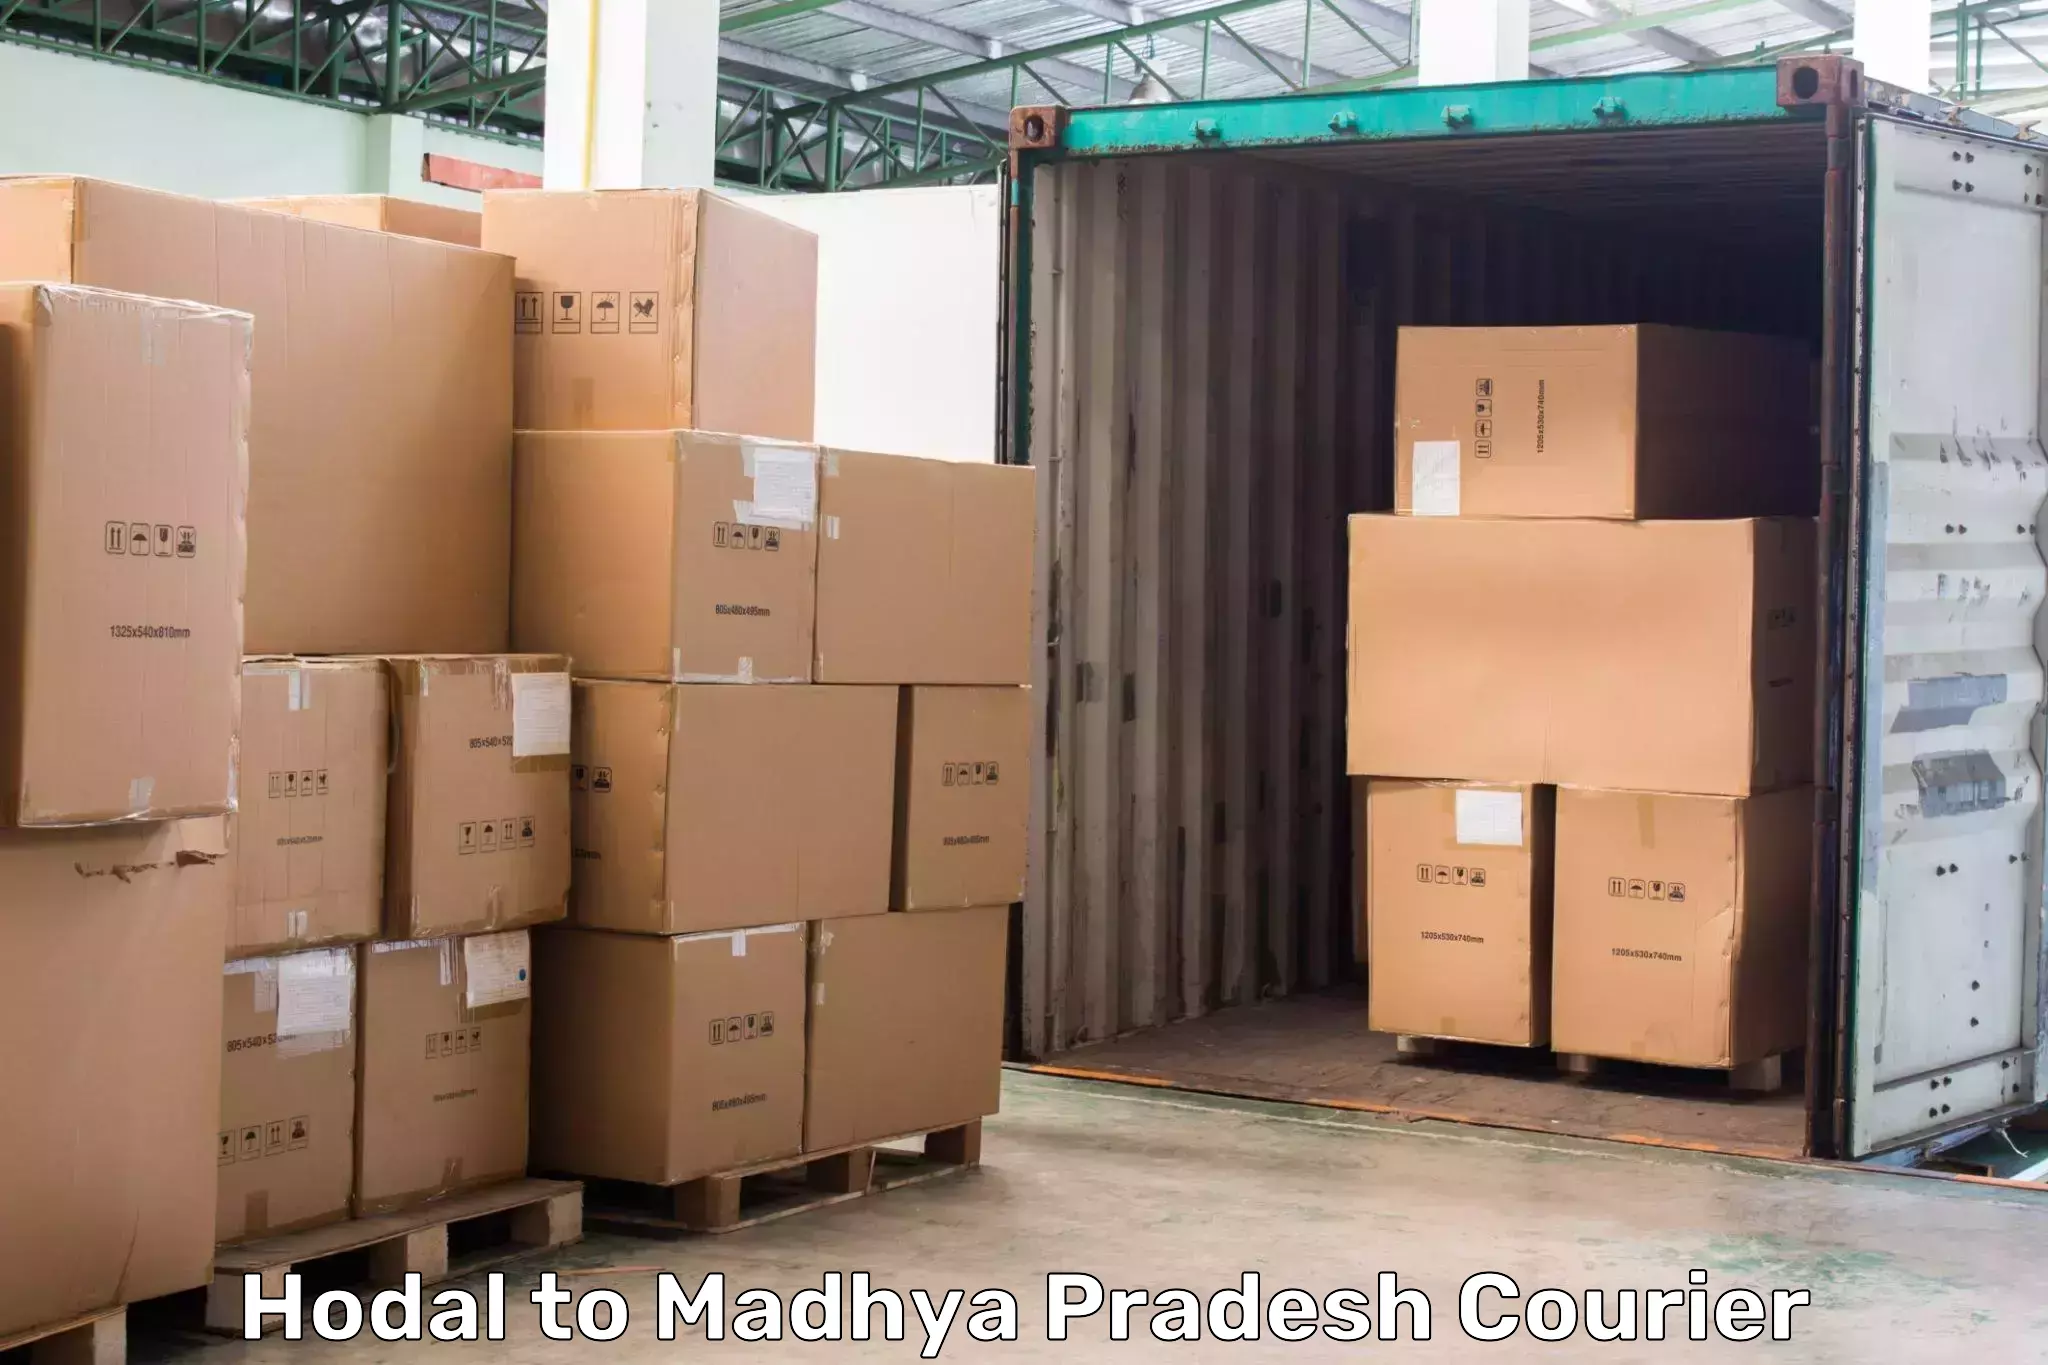 Local courier options Hodal to Lavkush Nagar